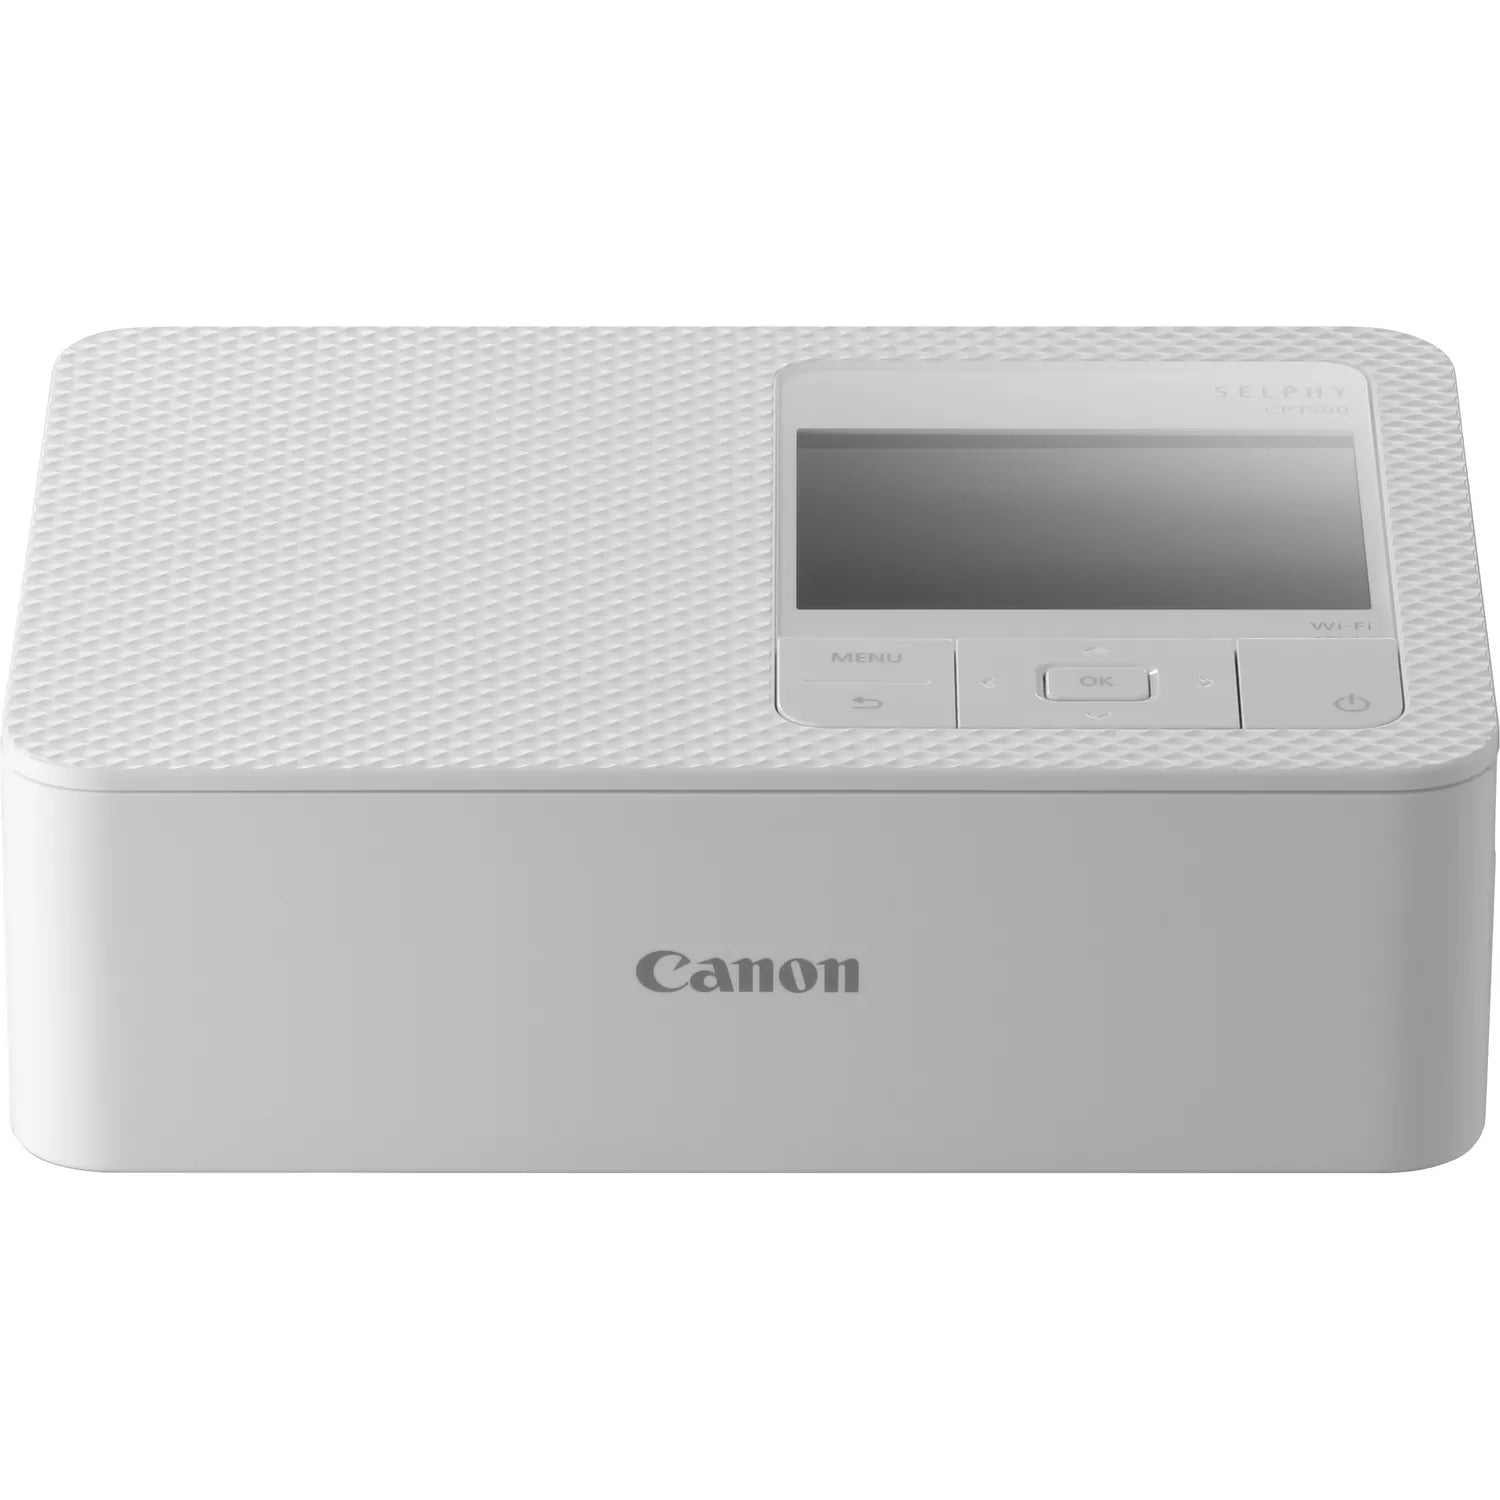 Canon SELPHY CP1500 Compact WiFi Photo Printer and RP108 kit  - White